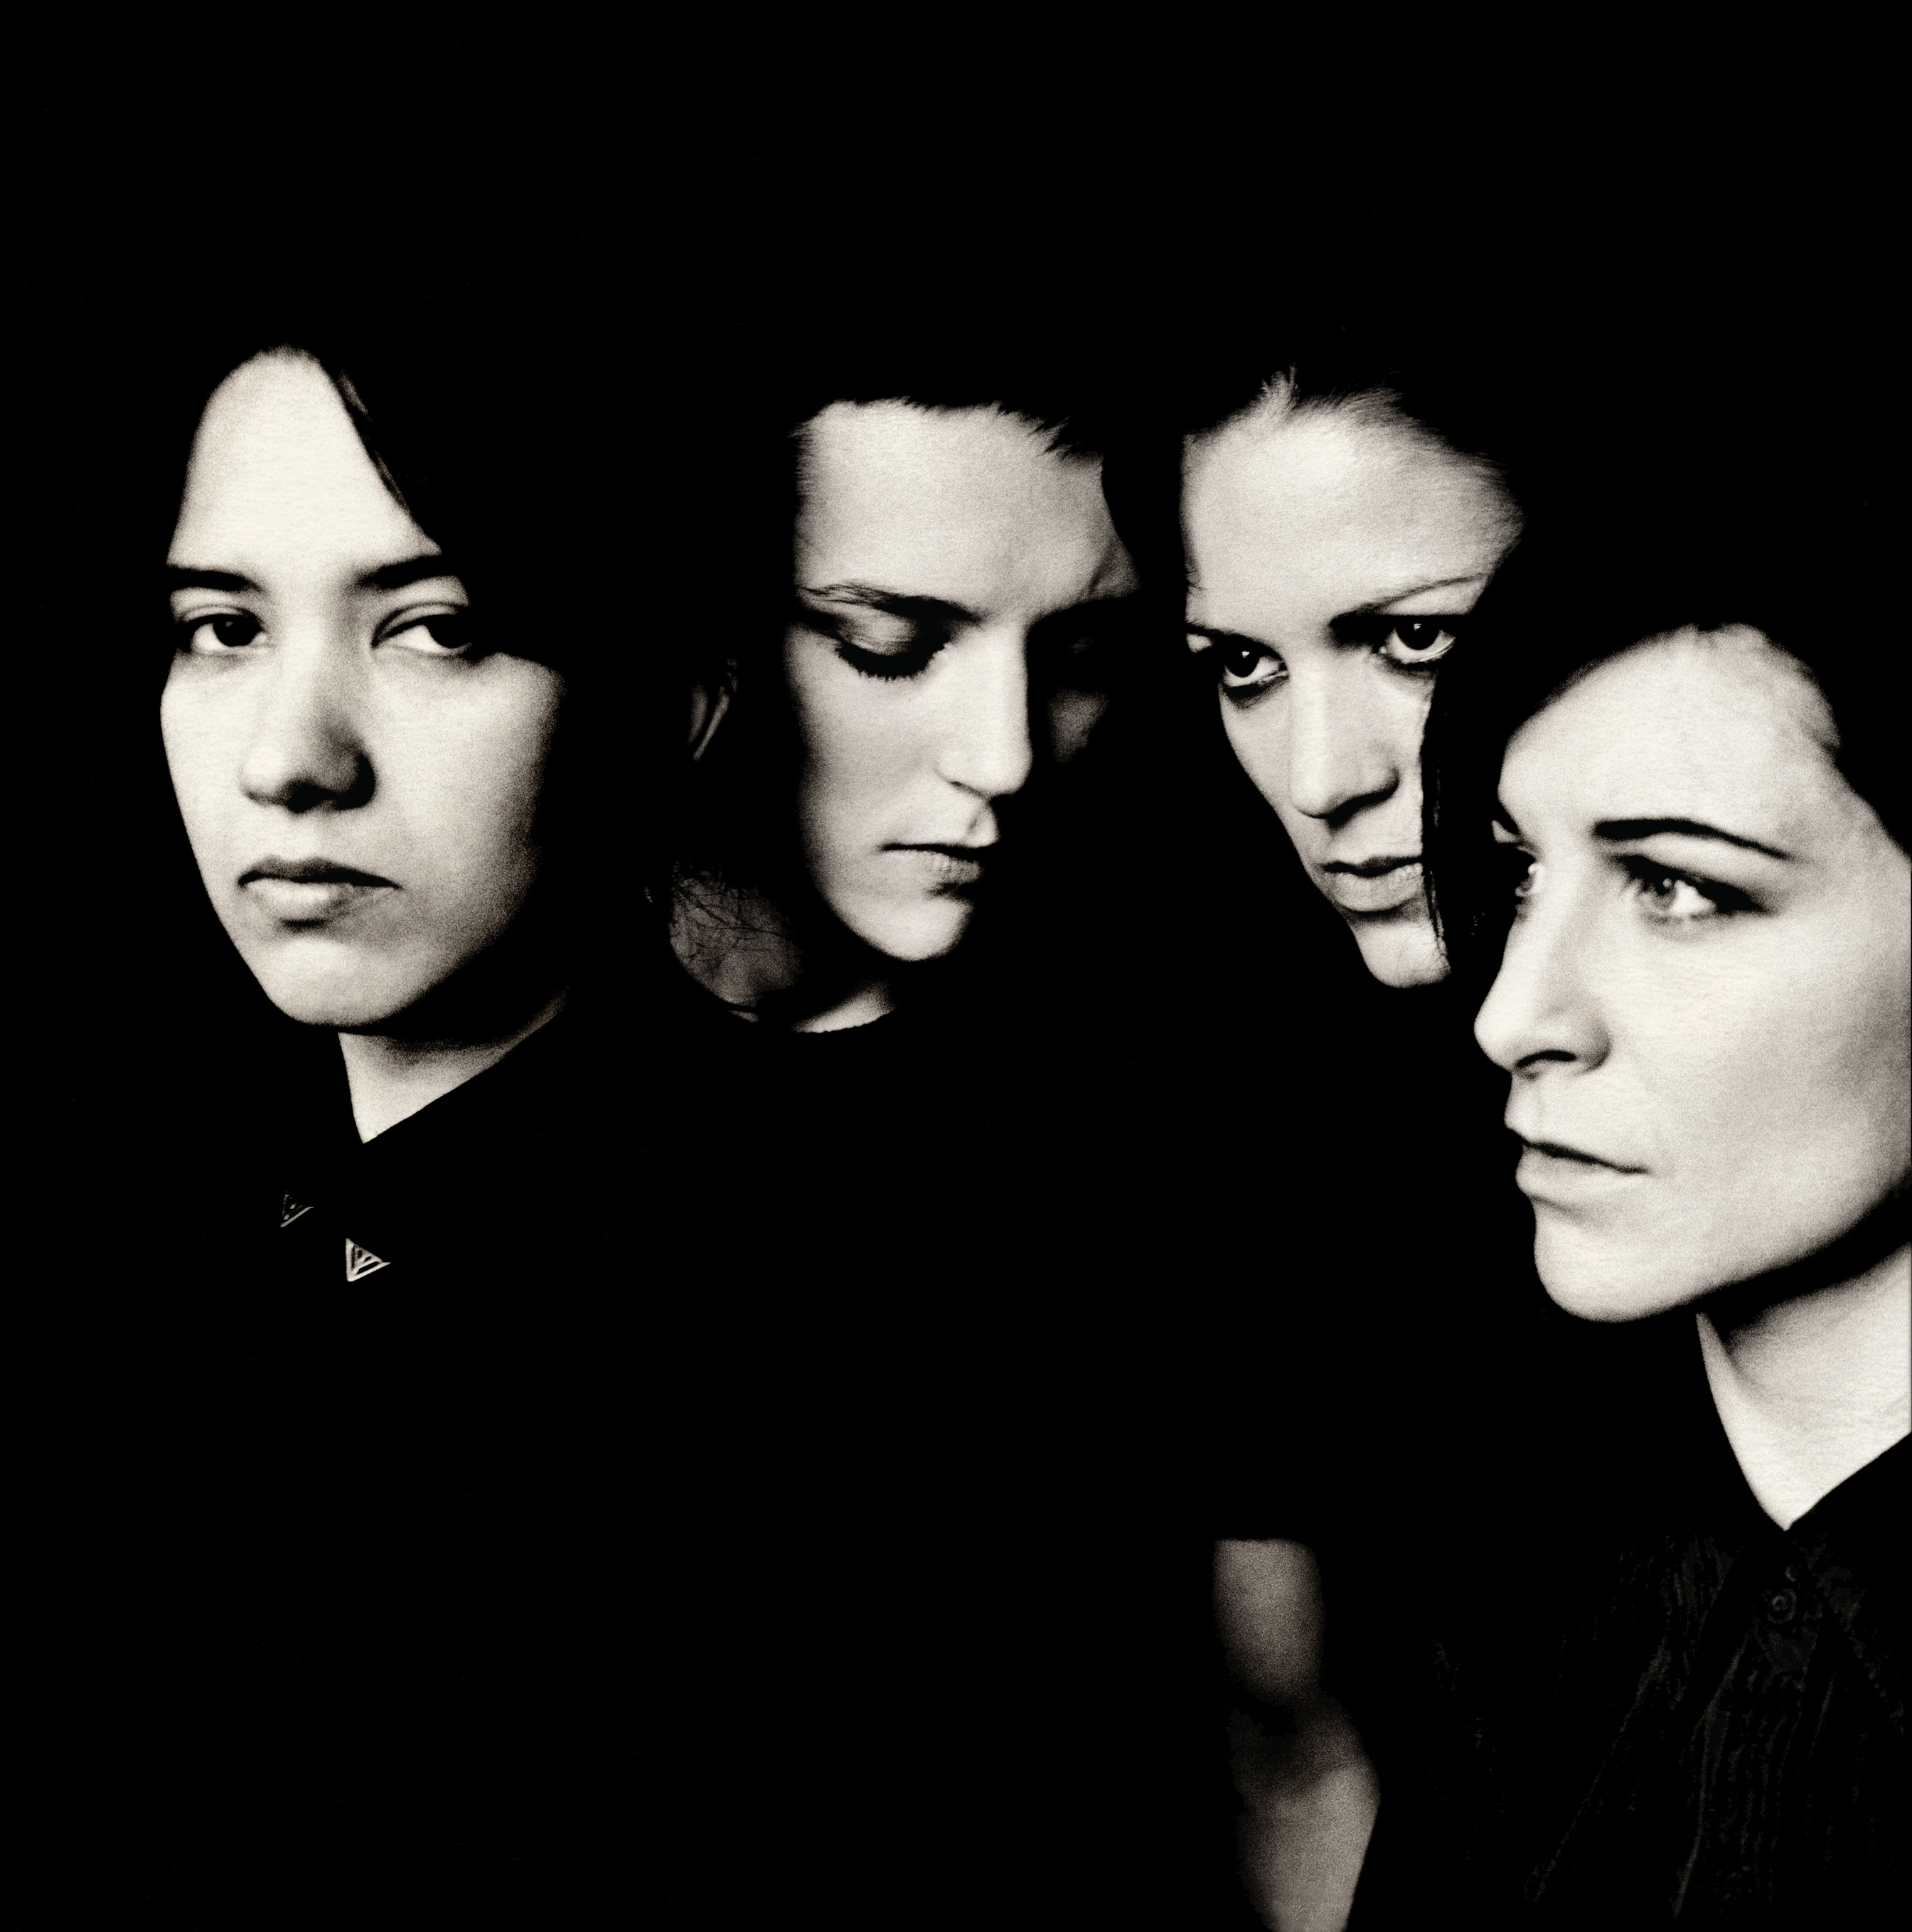 Savages have released an Album Teaser, with Words written by Phyllis Rose from Jazz Cleopatra: Josephine Baker In Her Time